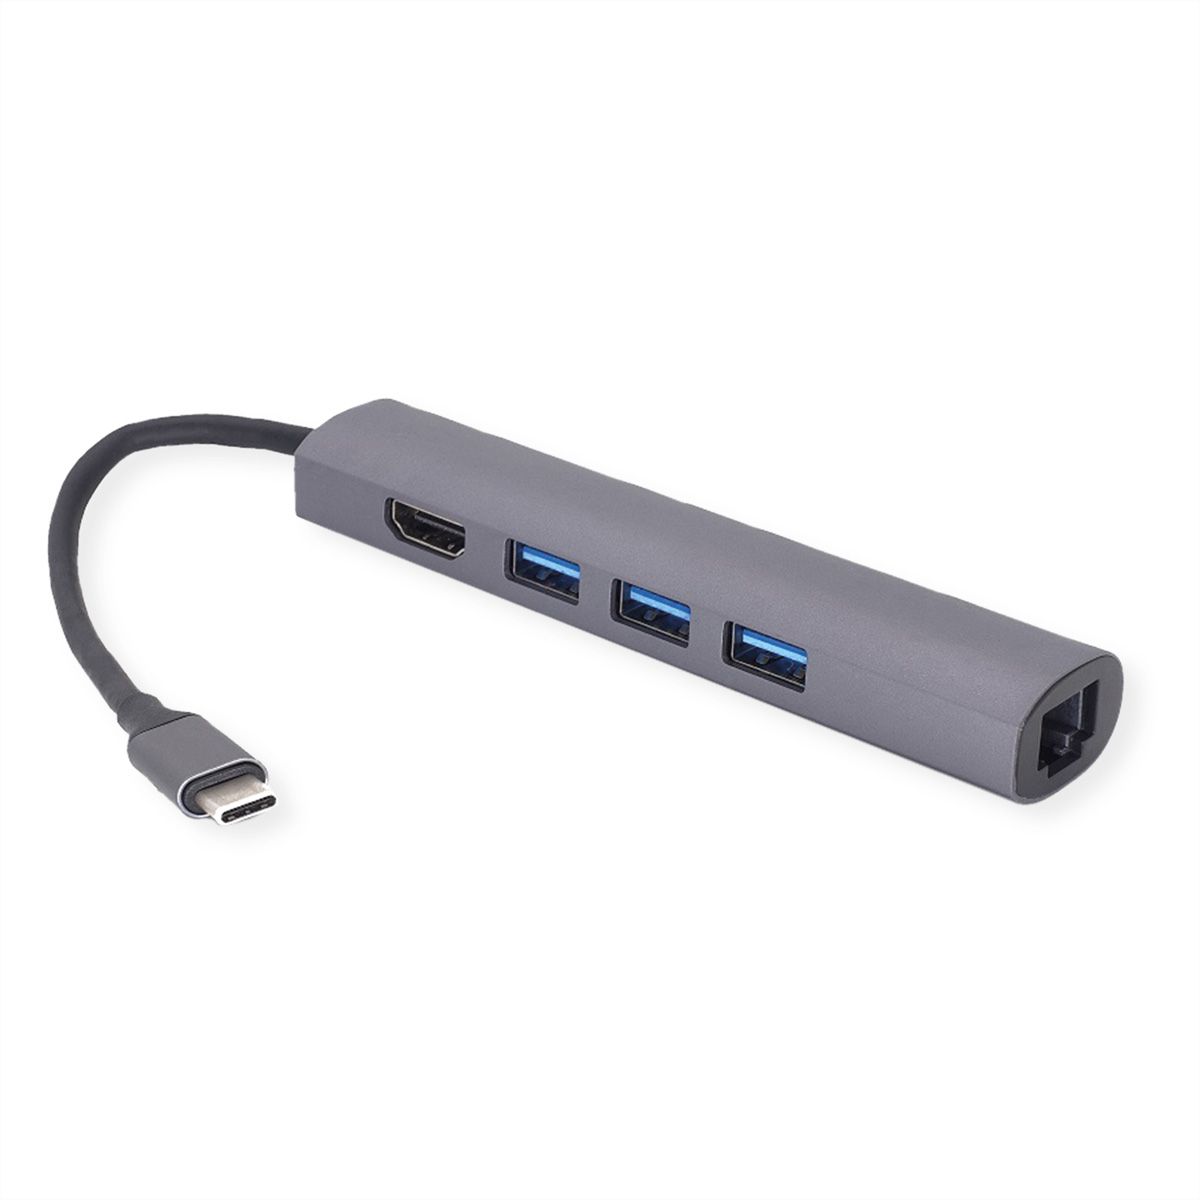 VALUE Adaptateur USB Type C - HDMI + USB 3.2 Gen 1 A + Type C (Power  Delivery) - SECOMP France